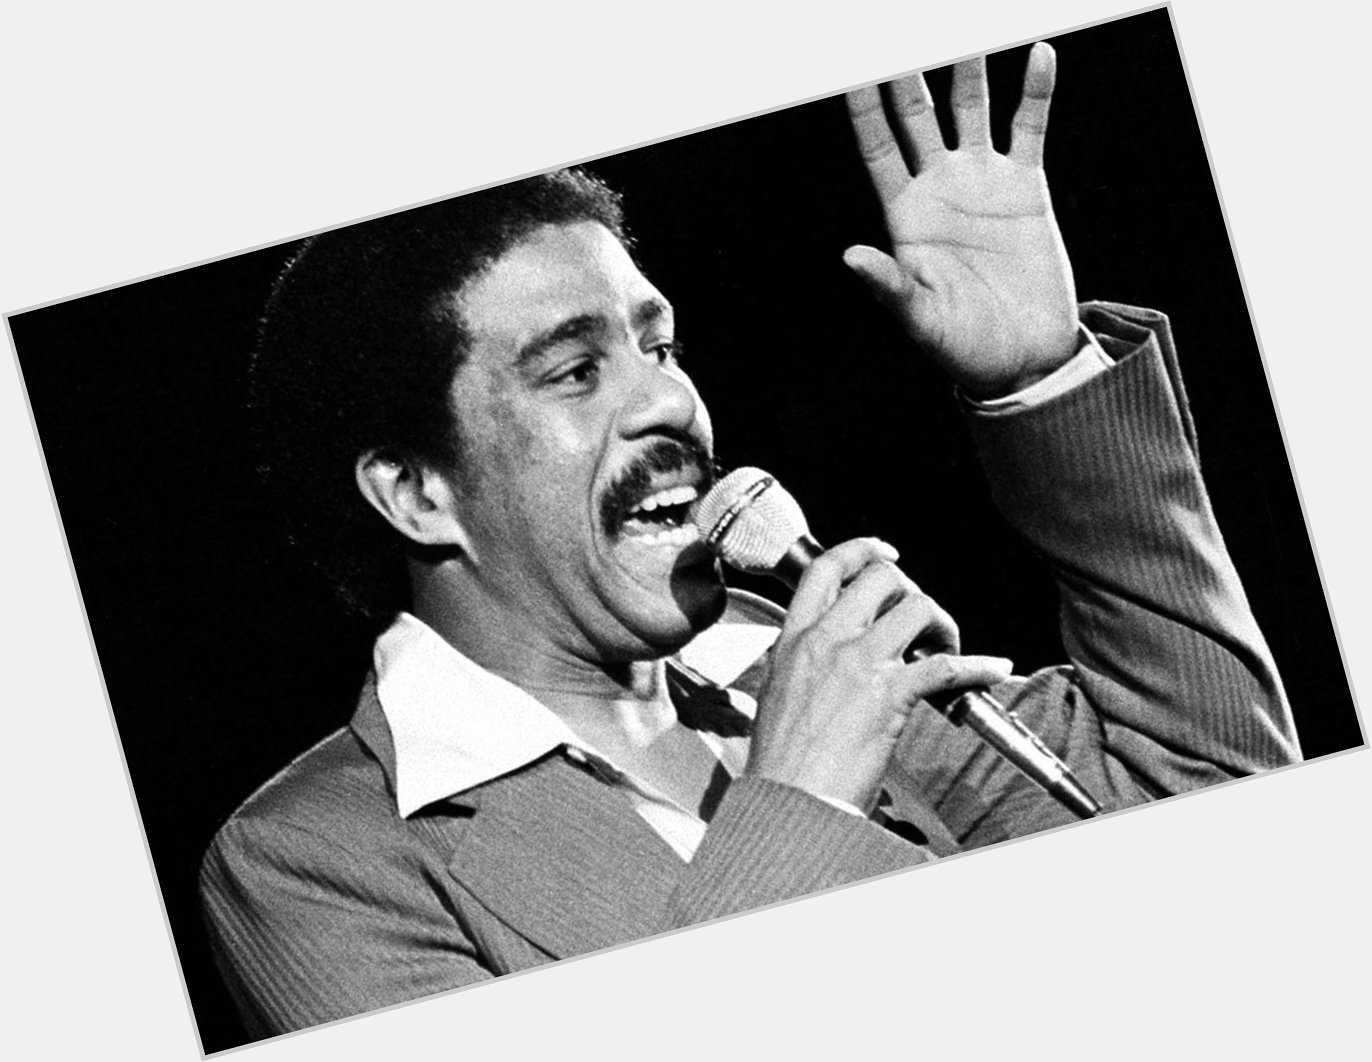 Happy 75th Birthday to the late Richard Pryor!  A true comedy genius & legend who truly paved the way. 